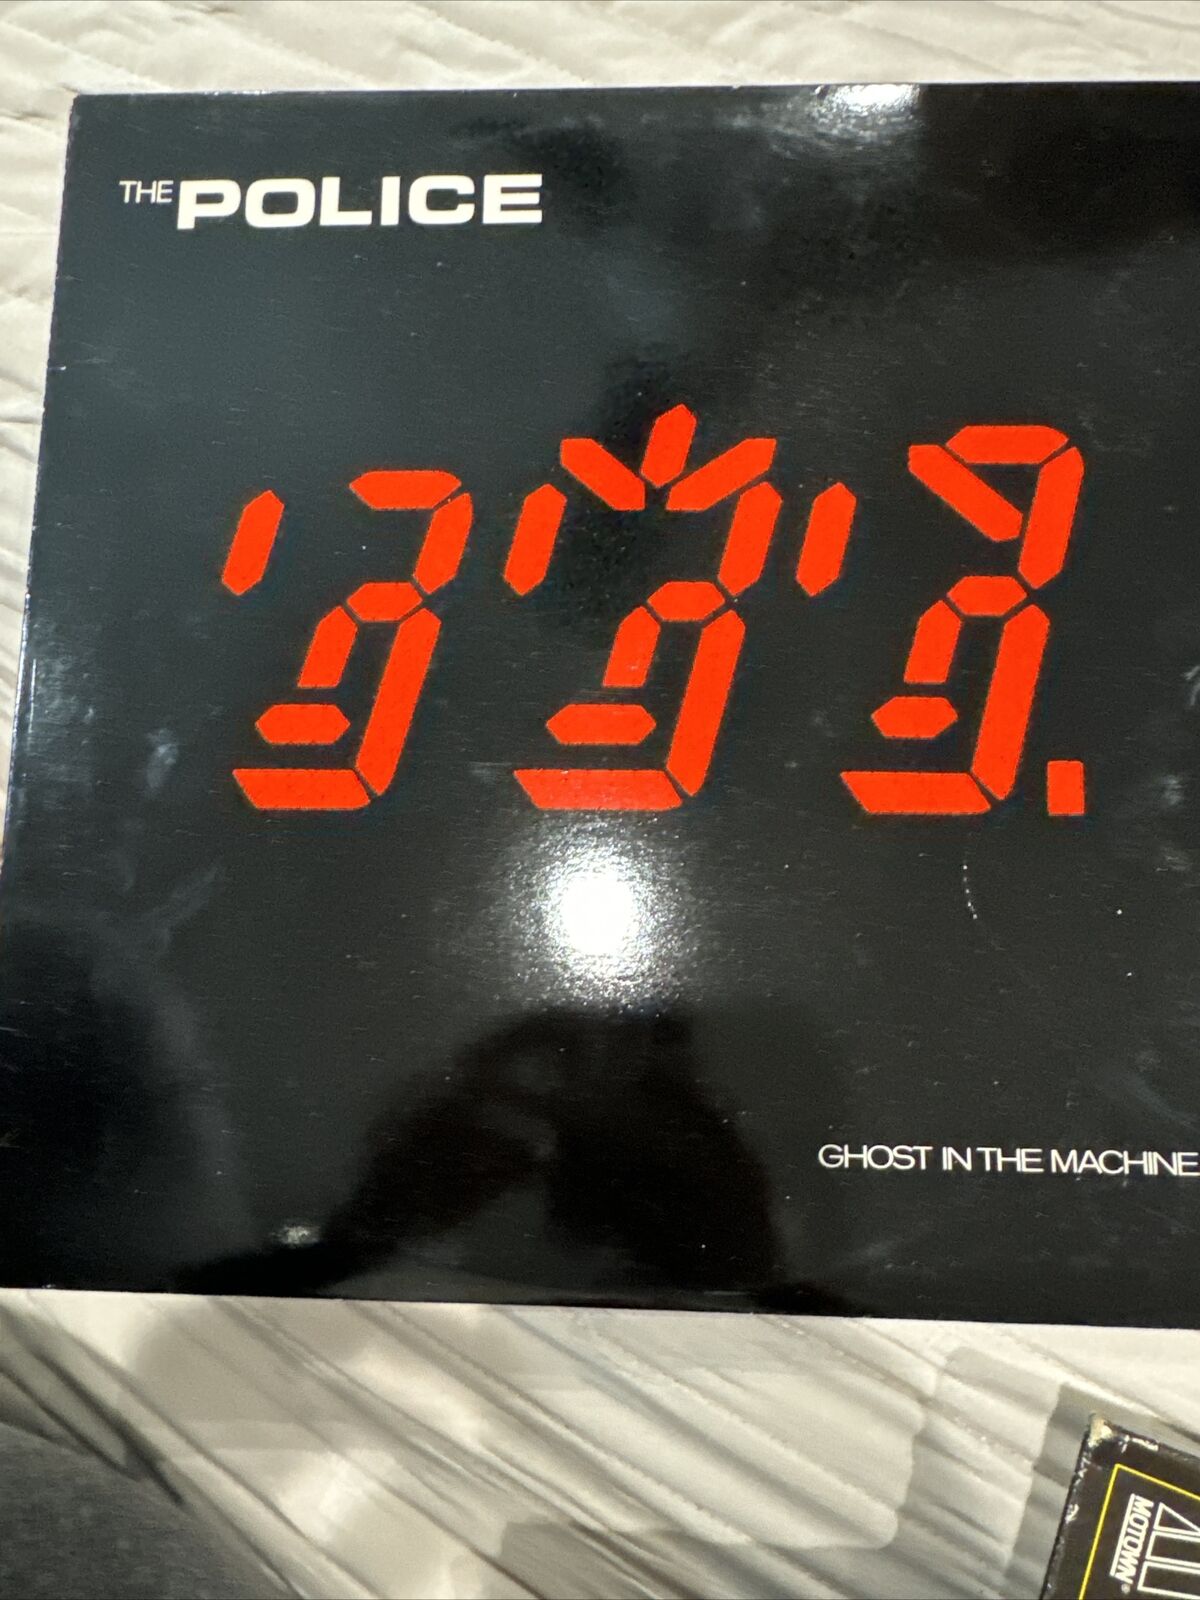 Vinyl Record Ghost in the Machine by Police